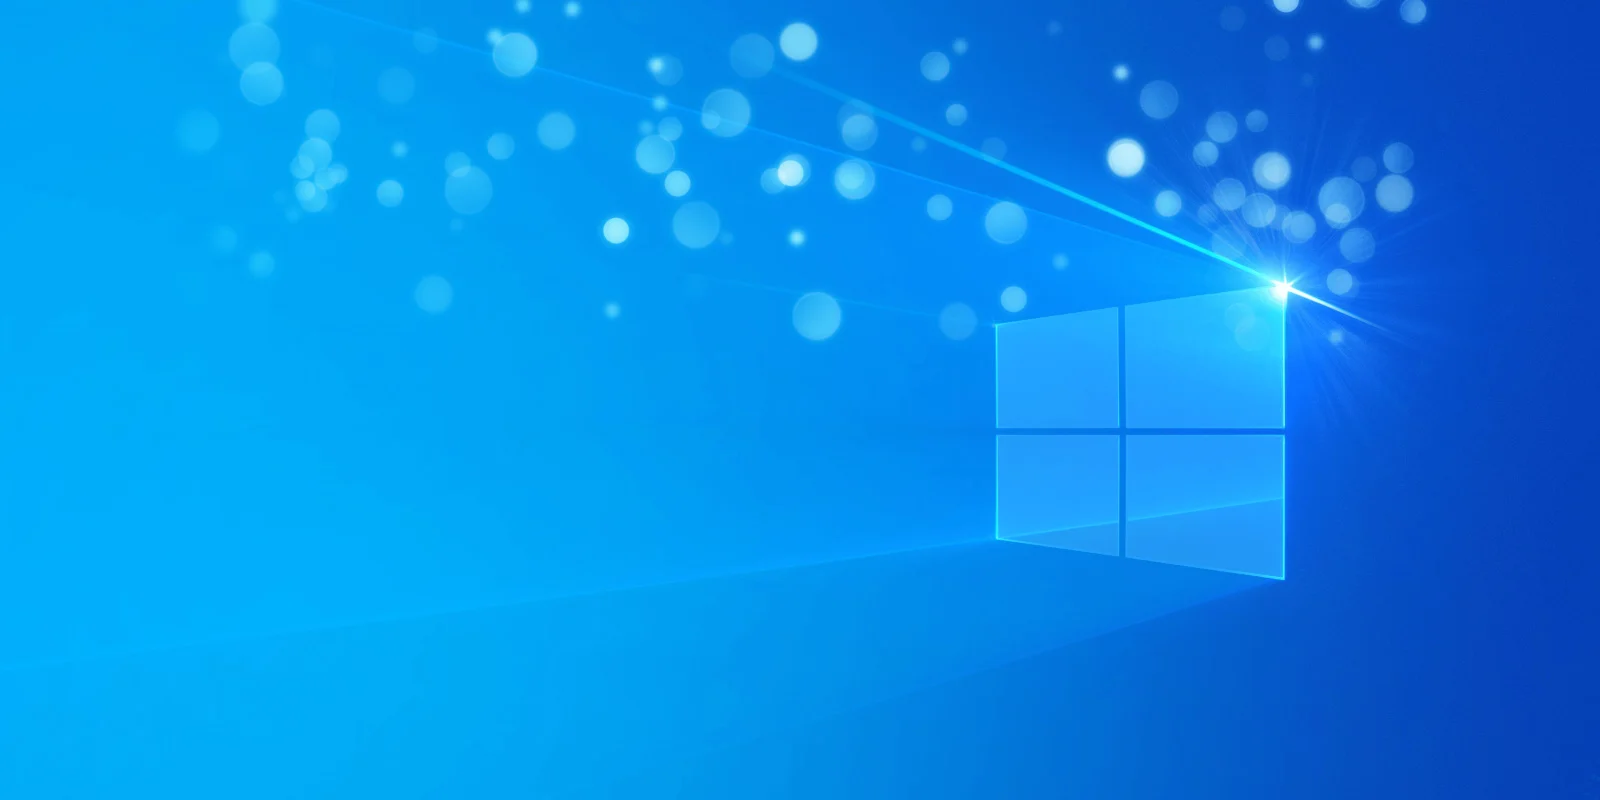 How to Do a System Restore on Windows 10?